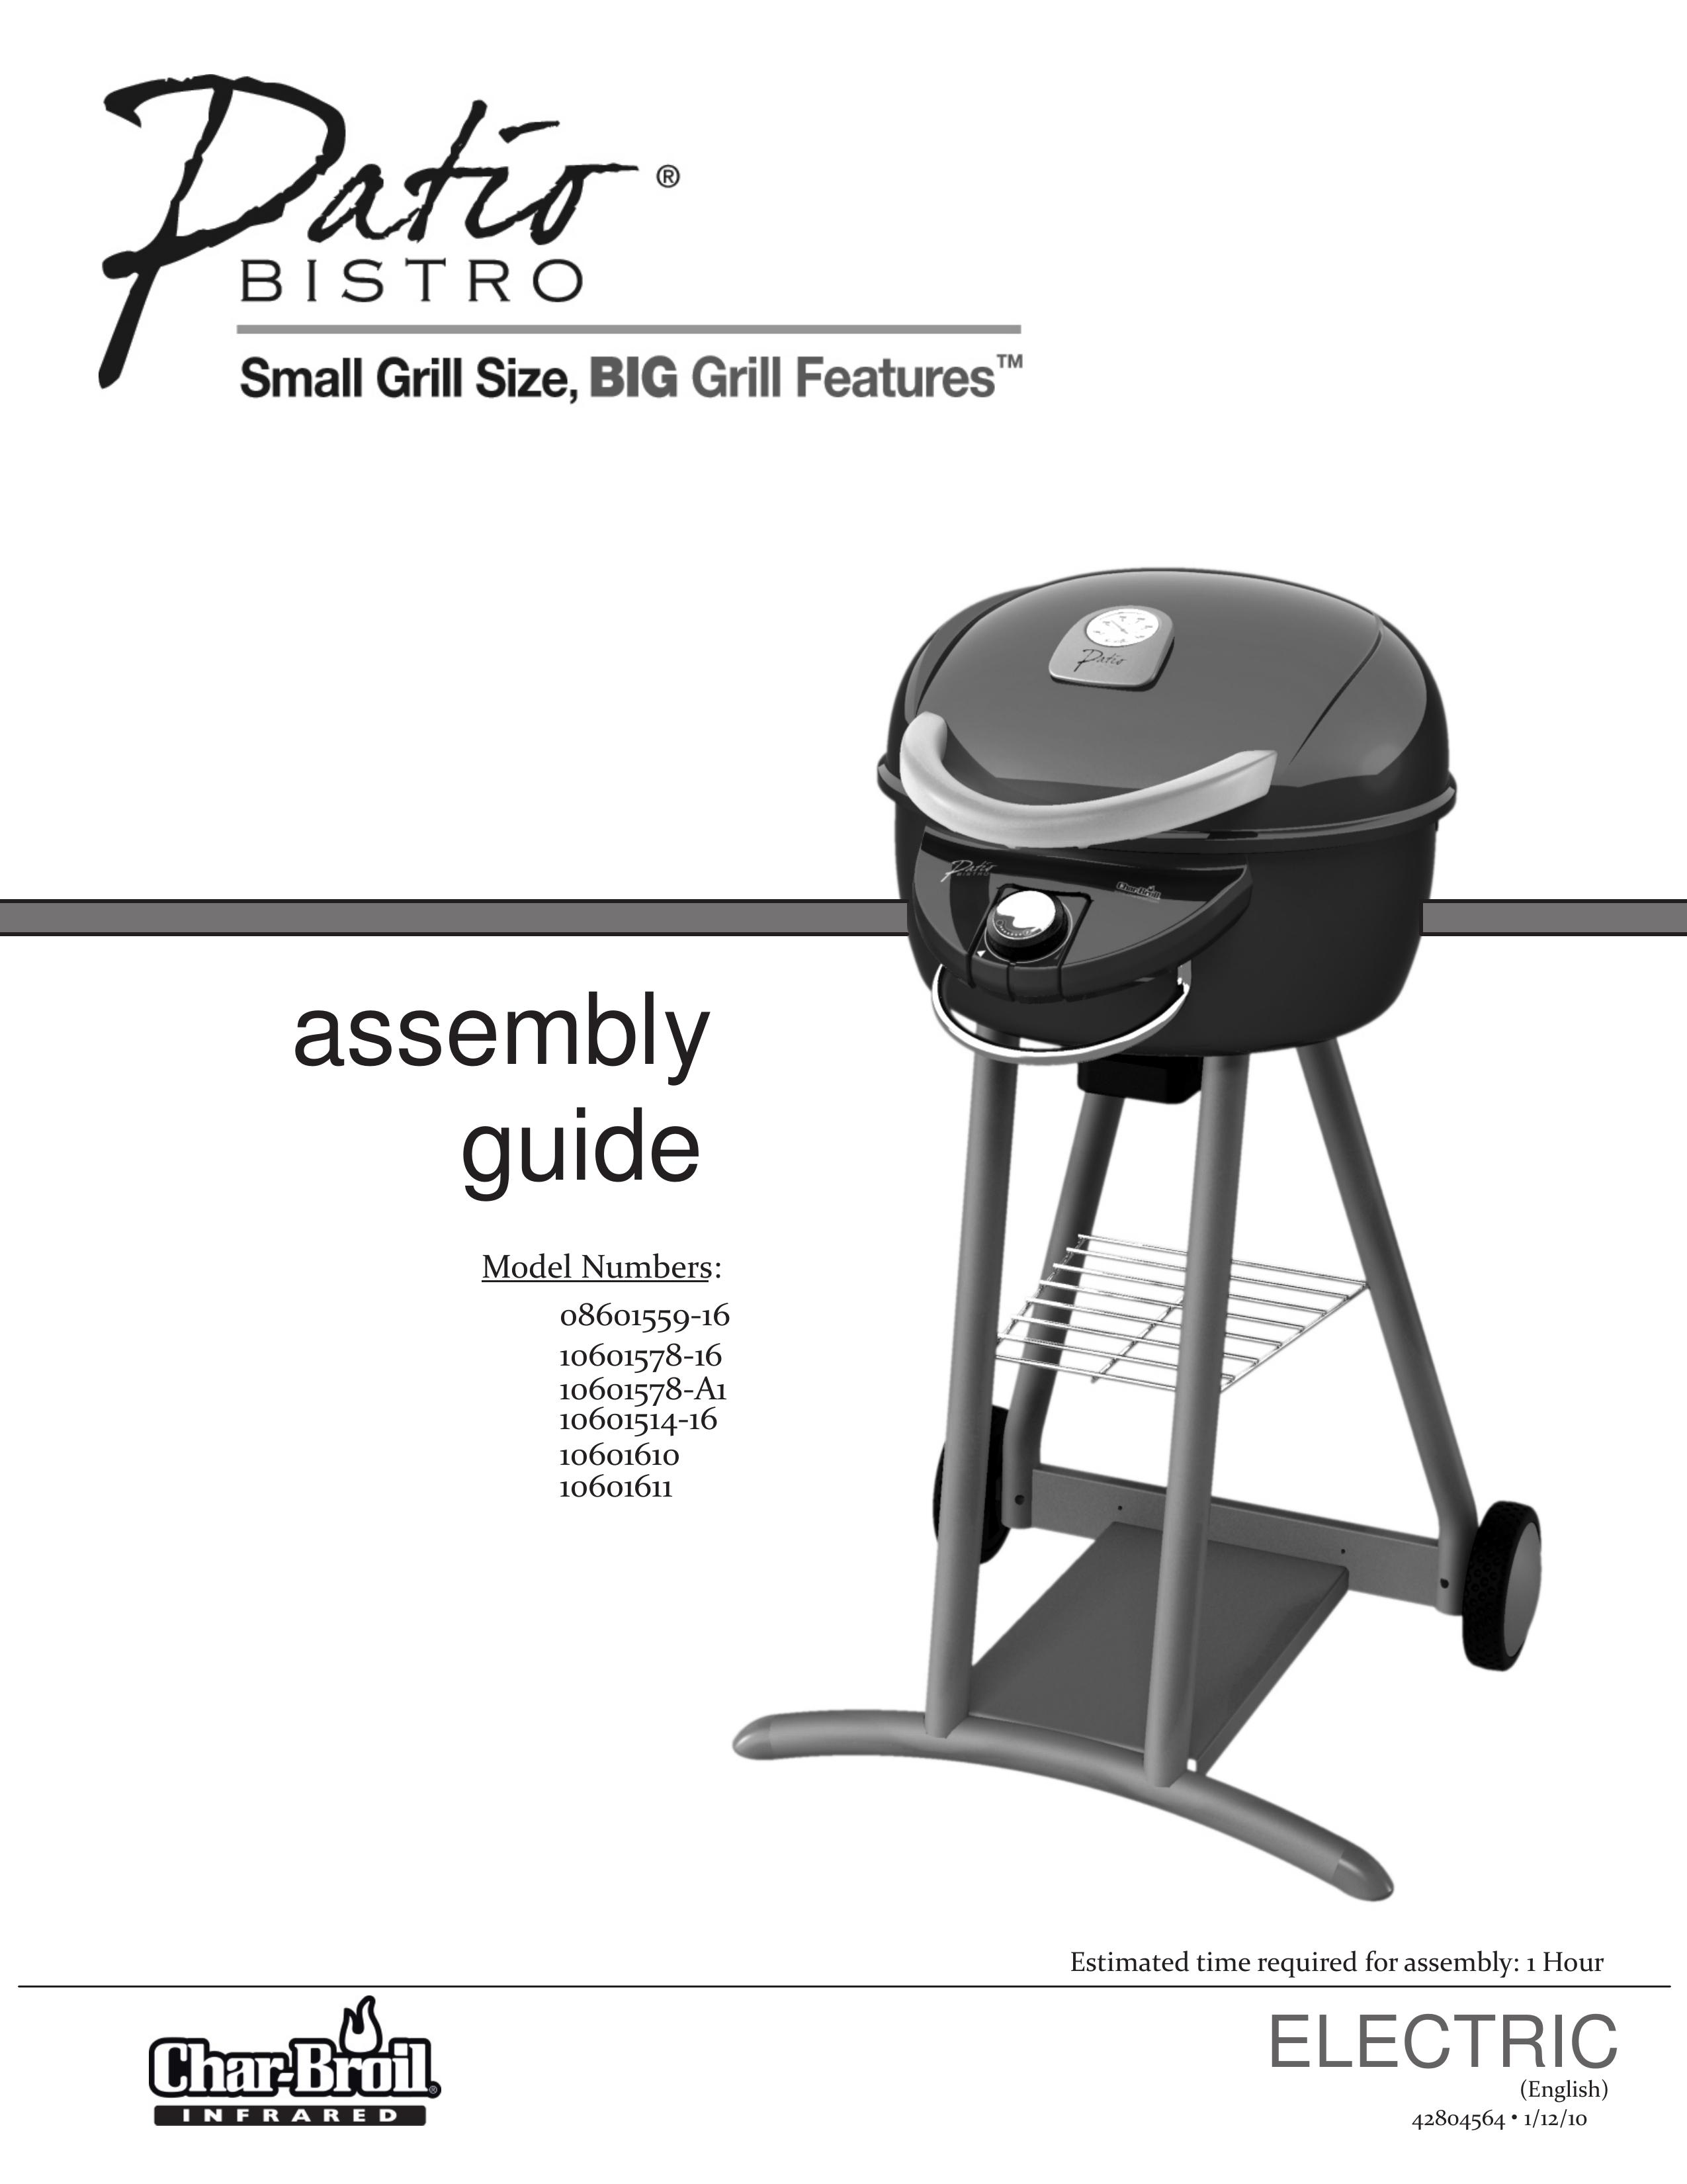 Char-Broil 10601514-16 Electric Grill User Manual (Page 1)